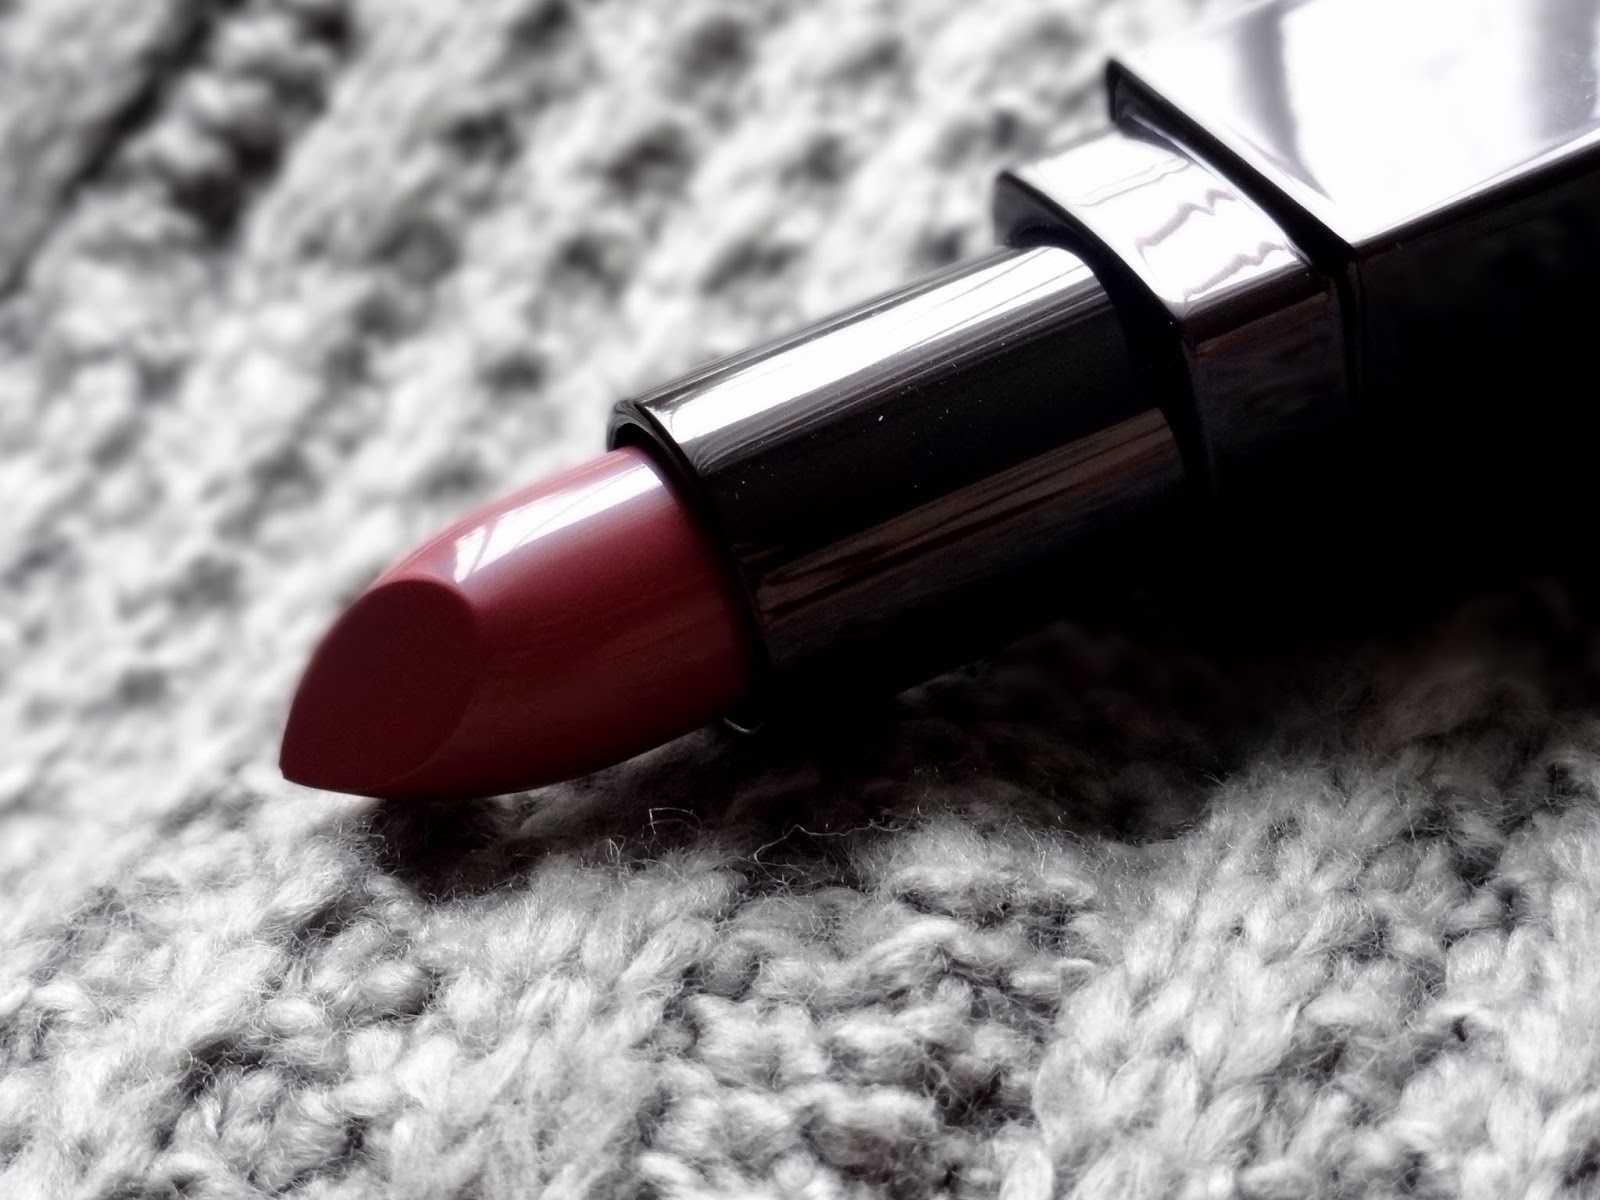 Laura Mercier Creme Smooth Lip Colour in Dry Rose Review, Photos, Swatches